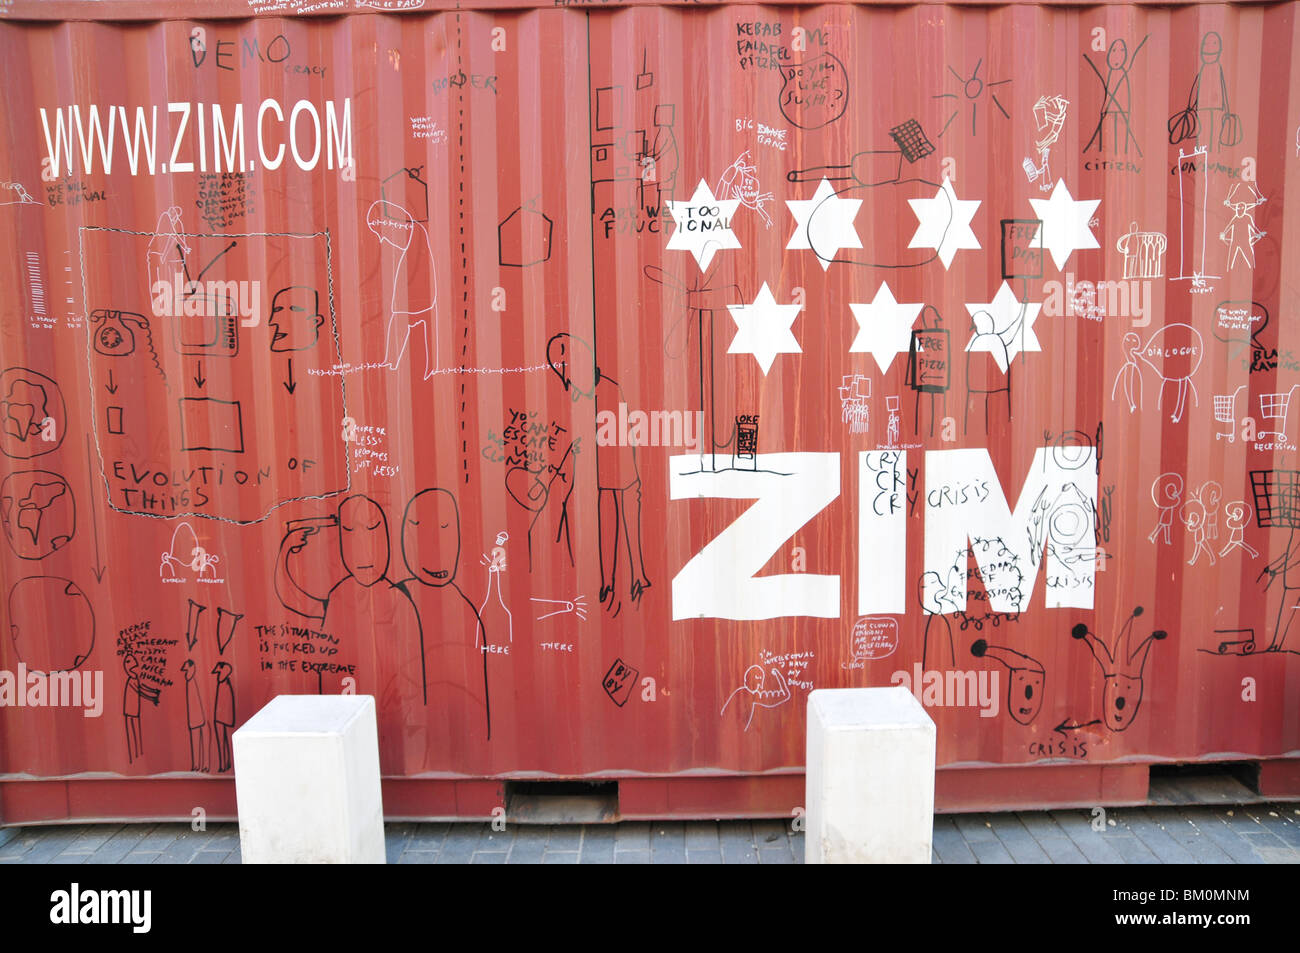 Zim Integrated Shipping Service logo on a shipping container Stock Photo